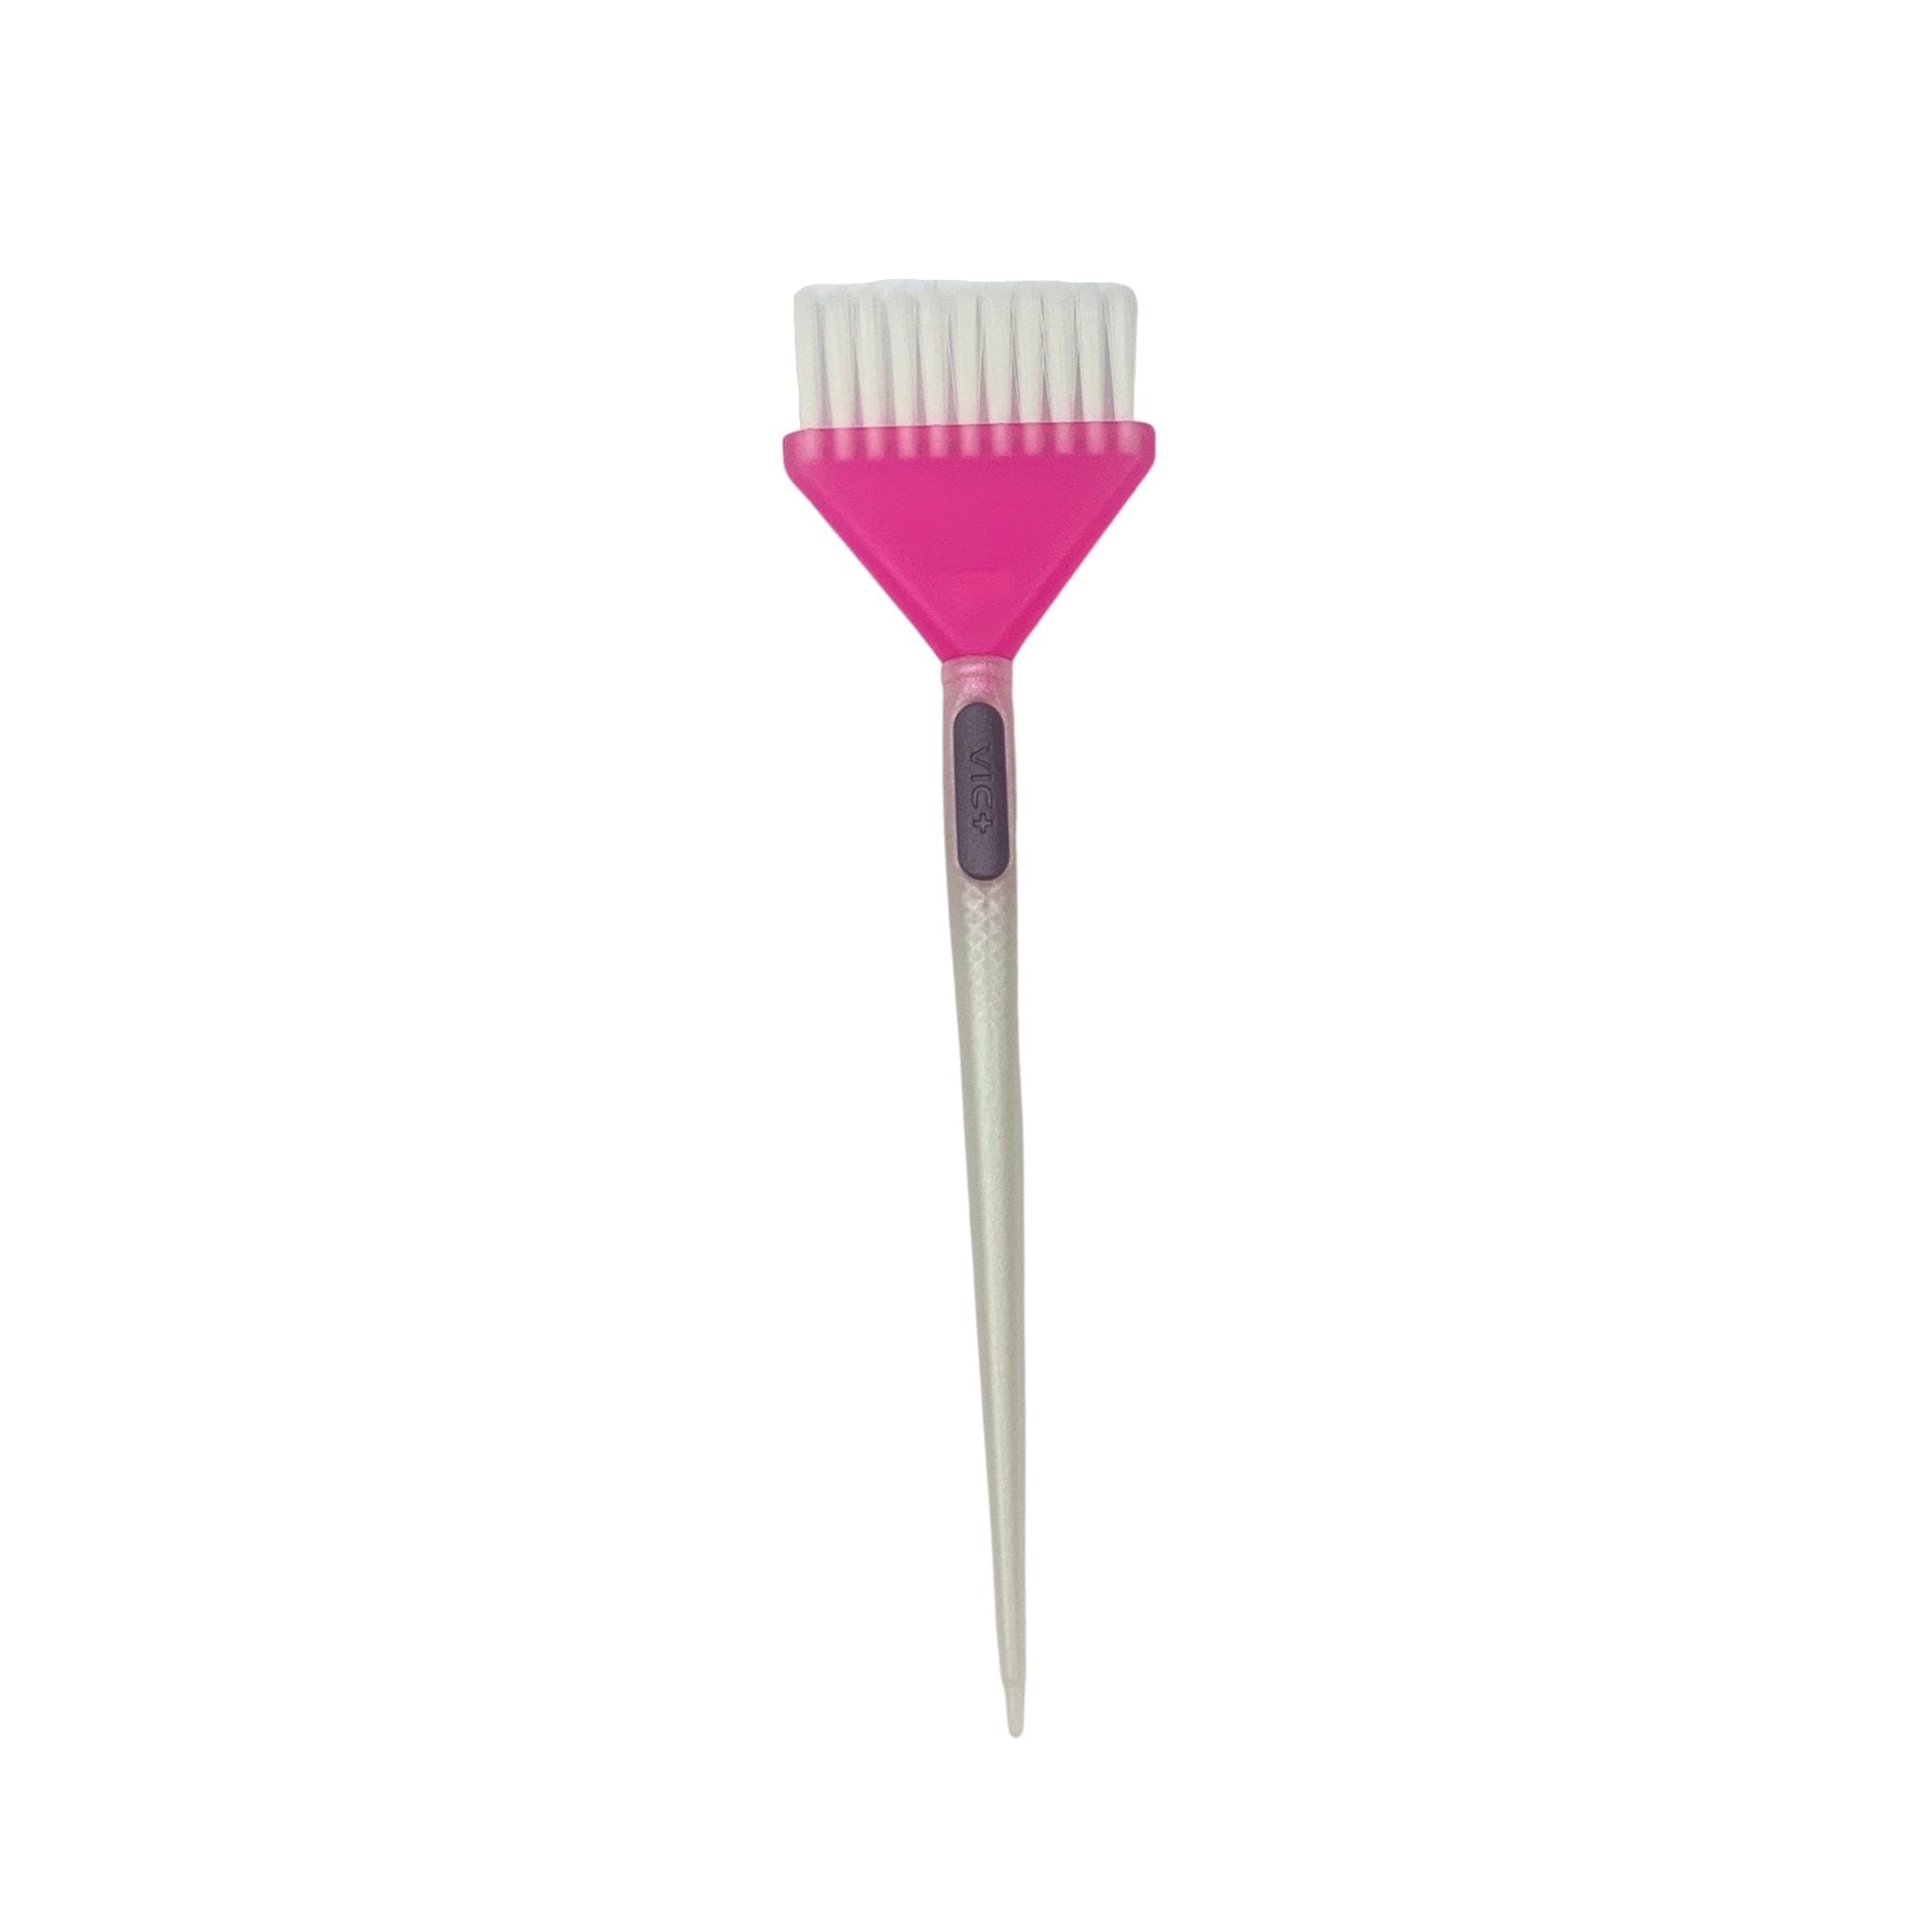 Pink Tint Brush with White Bristles - HairBeautyInk